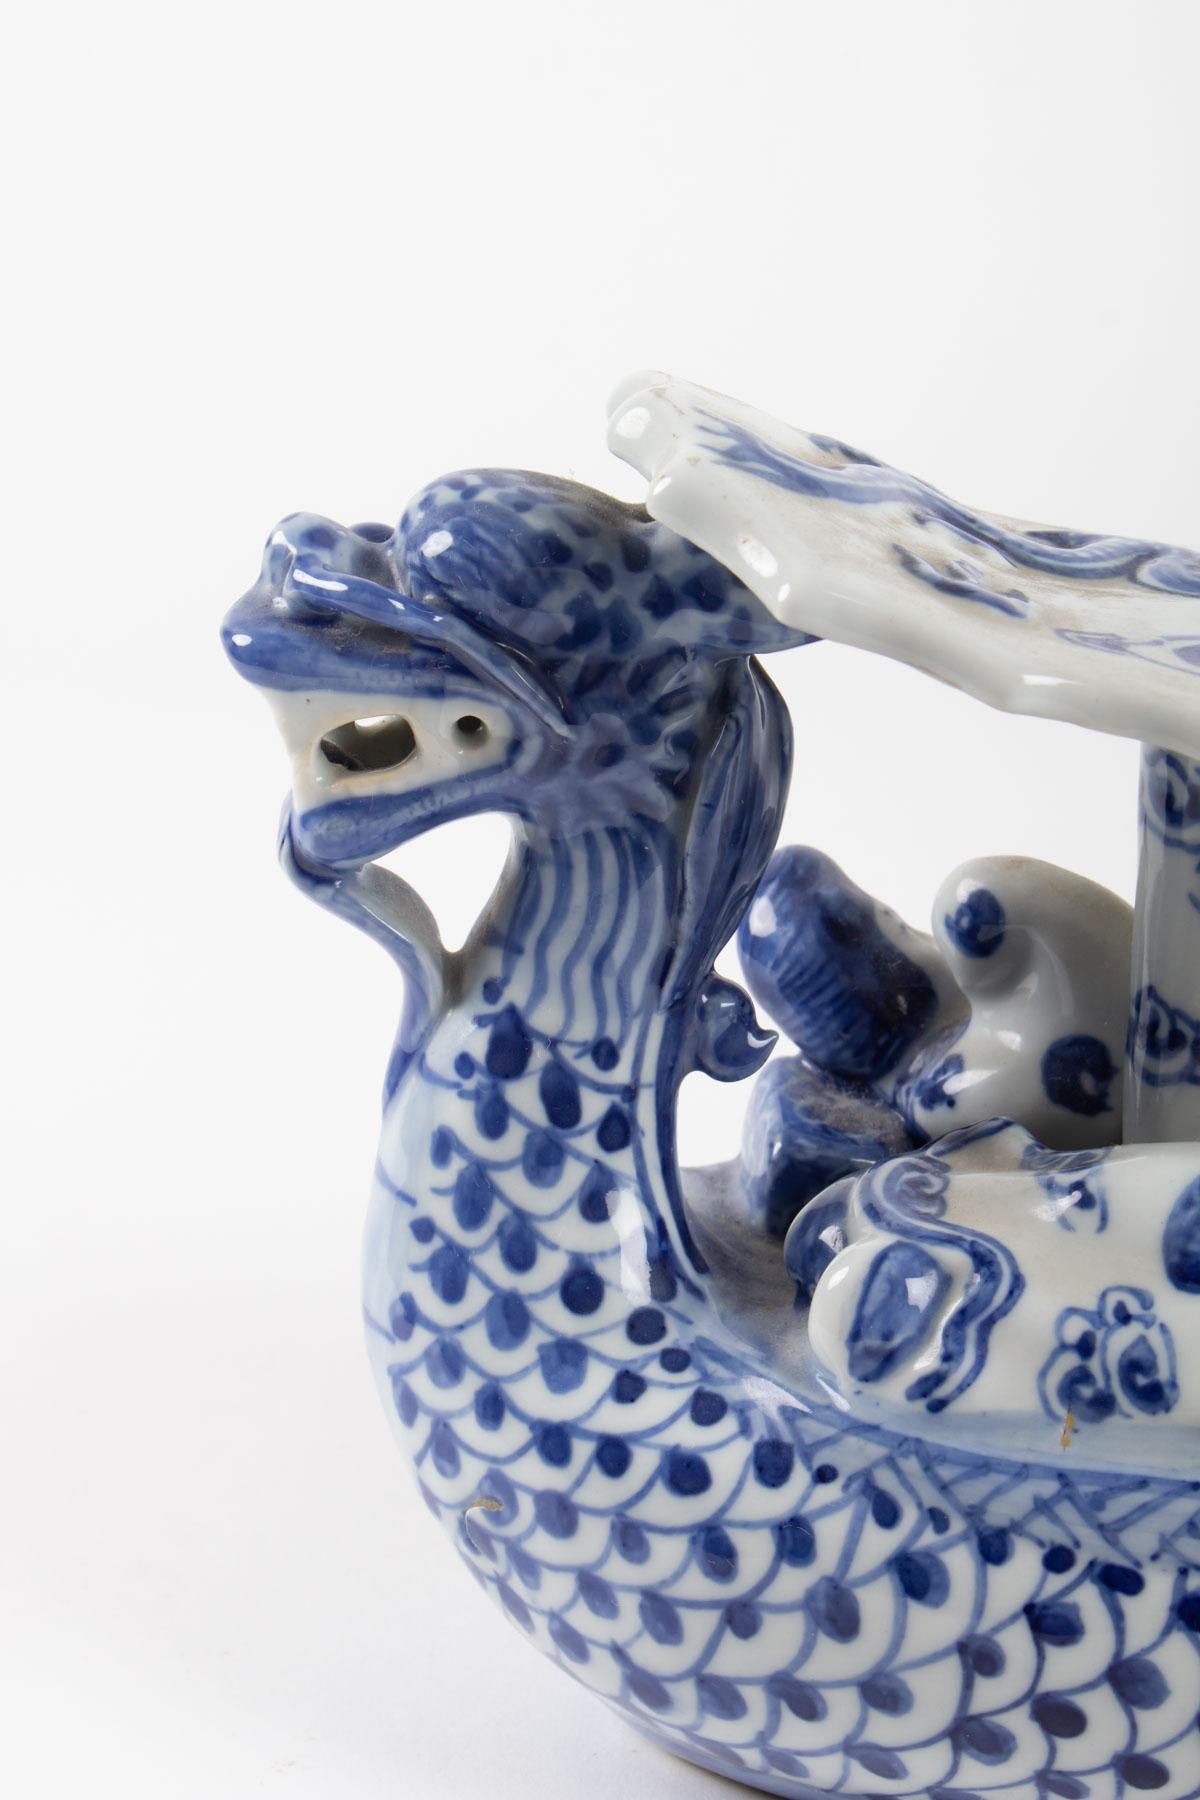 Chinese porcelain representing a Dragon walking couple, Early 20th century, blue and white porcelain
Measures: L 22cm, W 13cm, H 15cm.